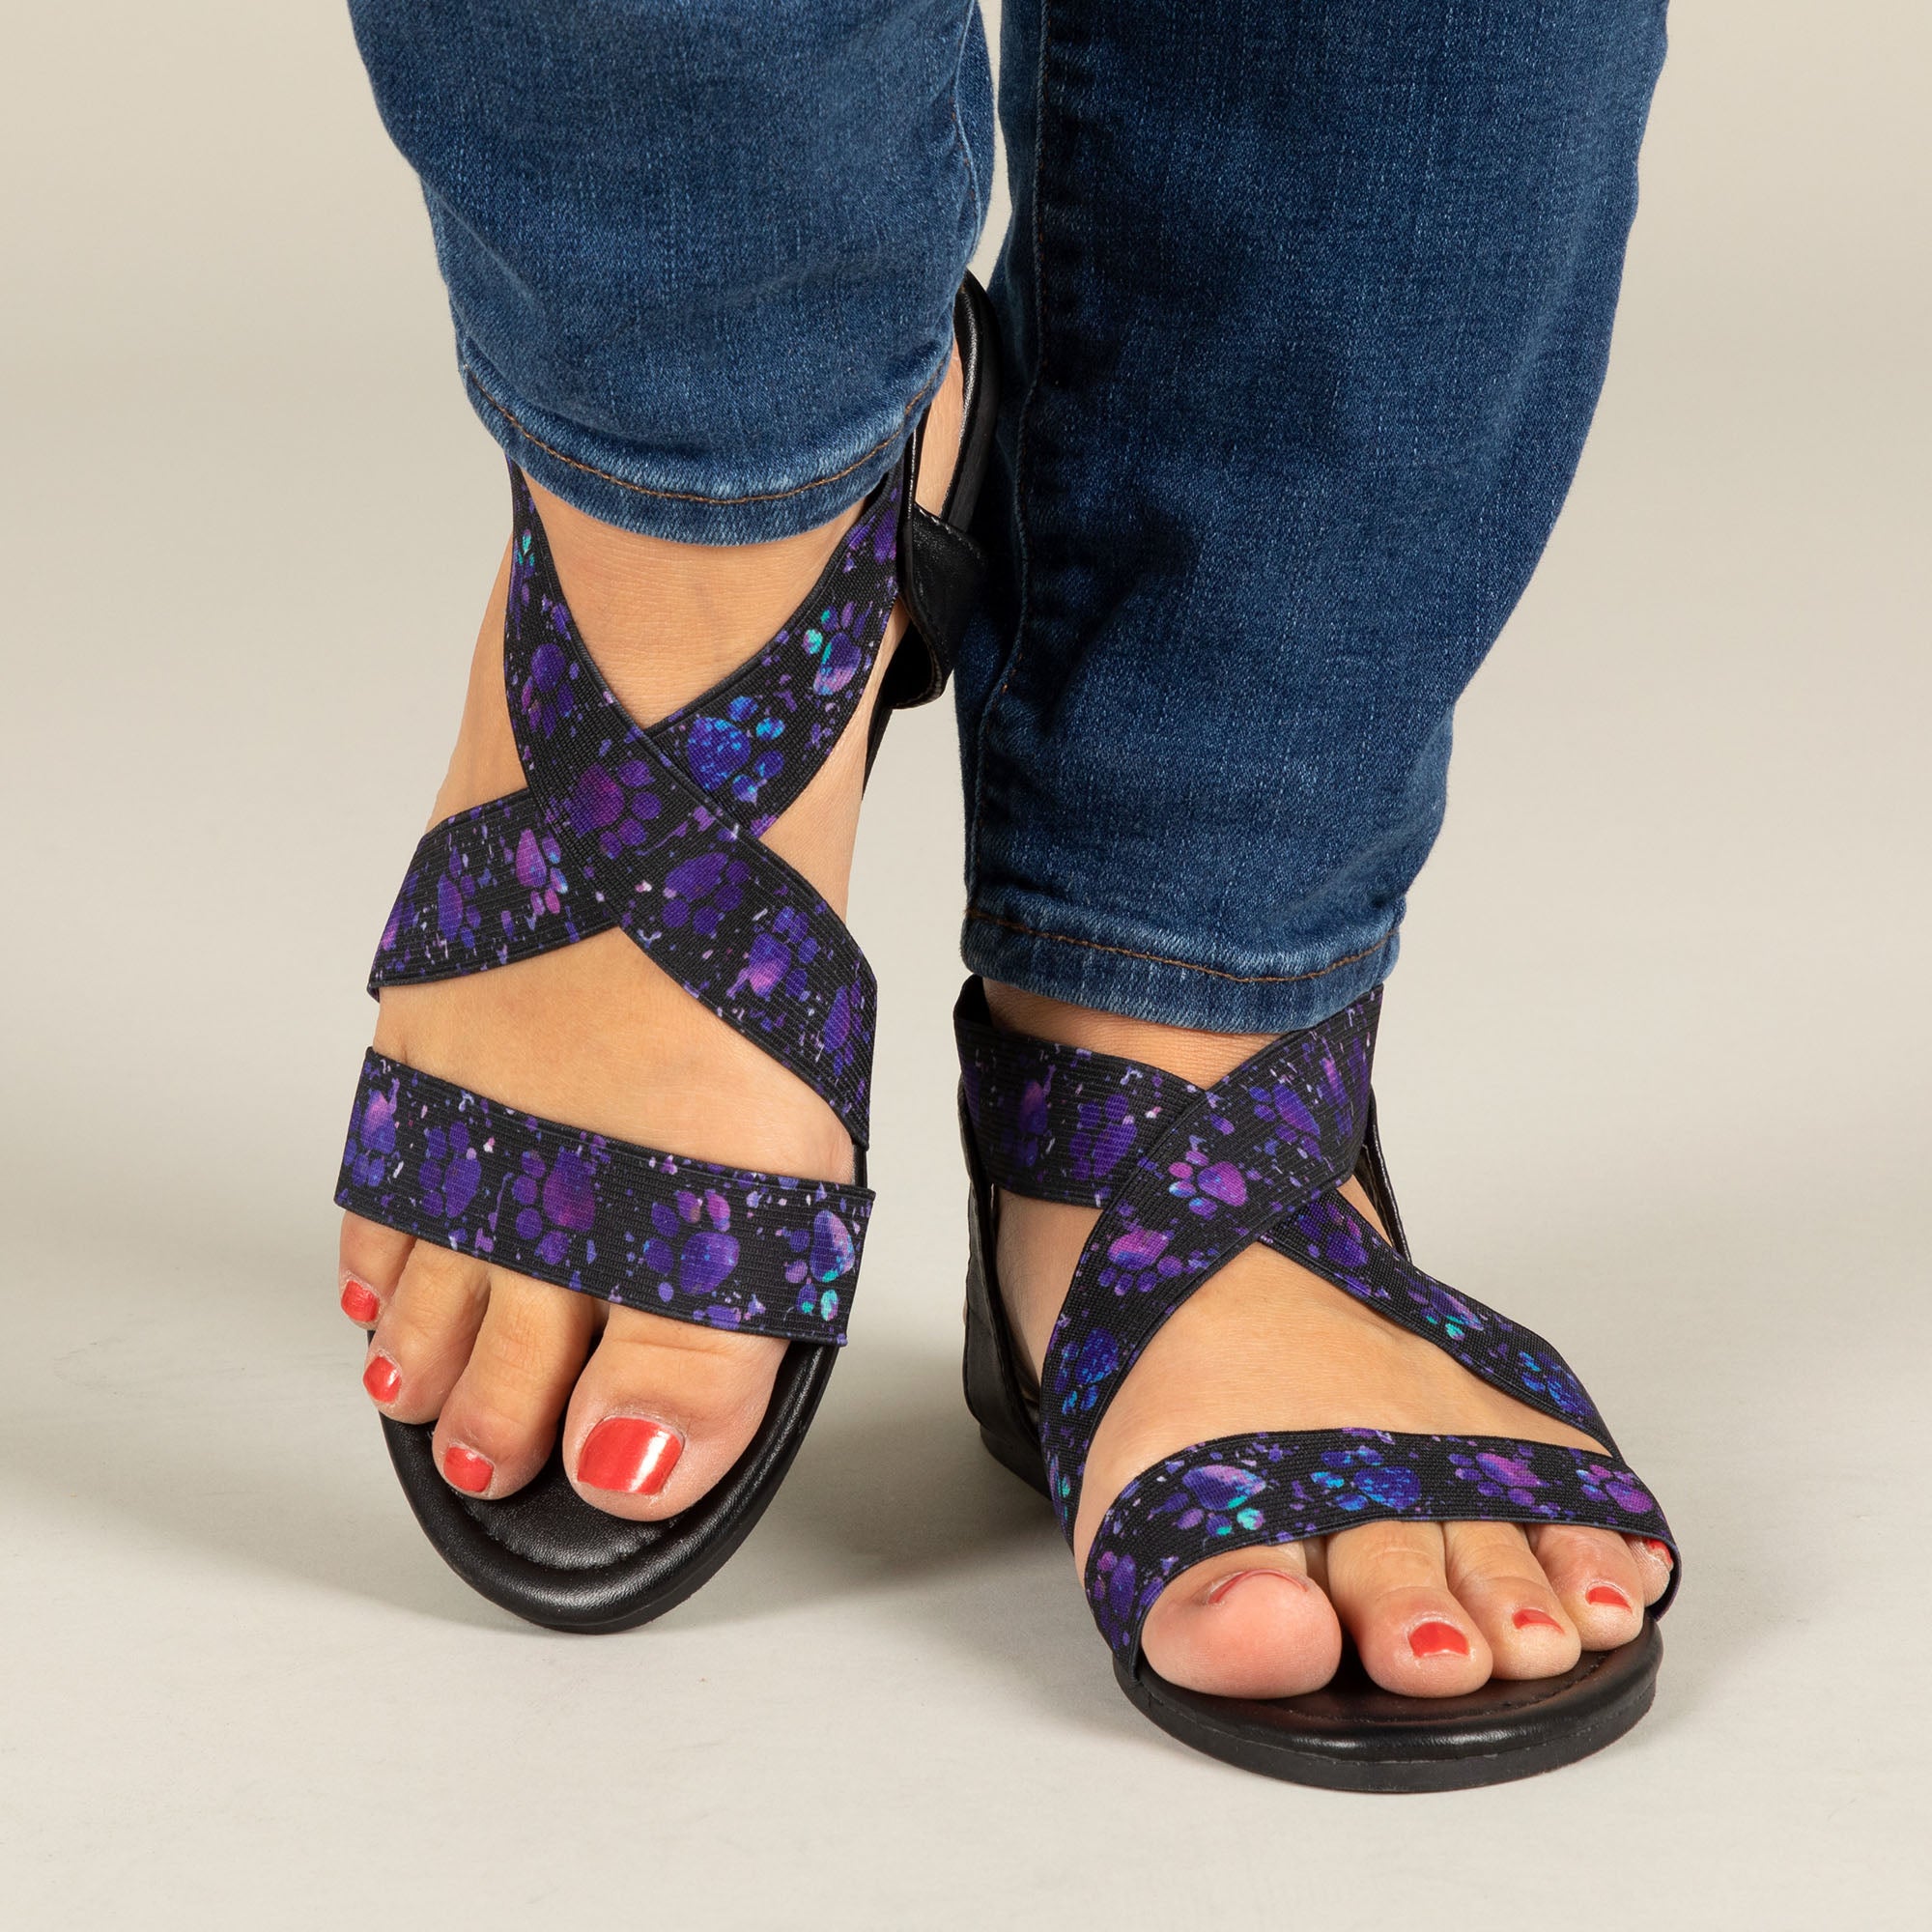 Pawsitively Stretchy Sandals - Painted Paws - 6